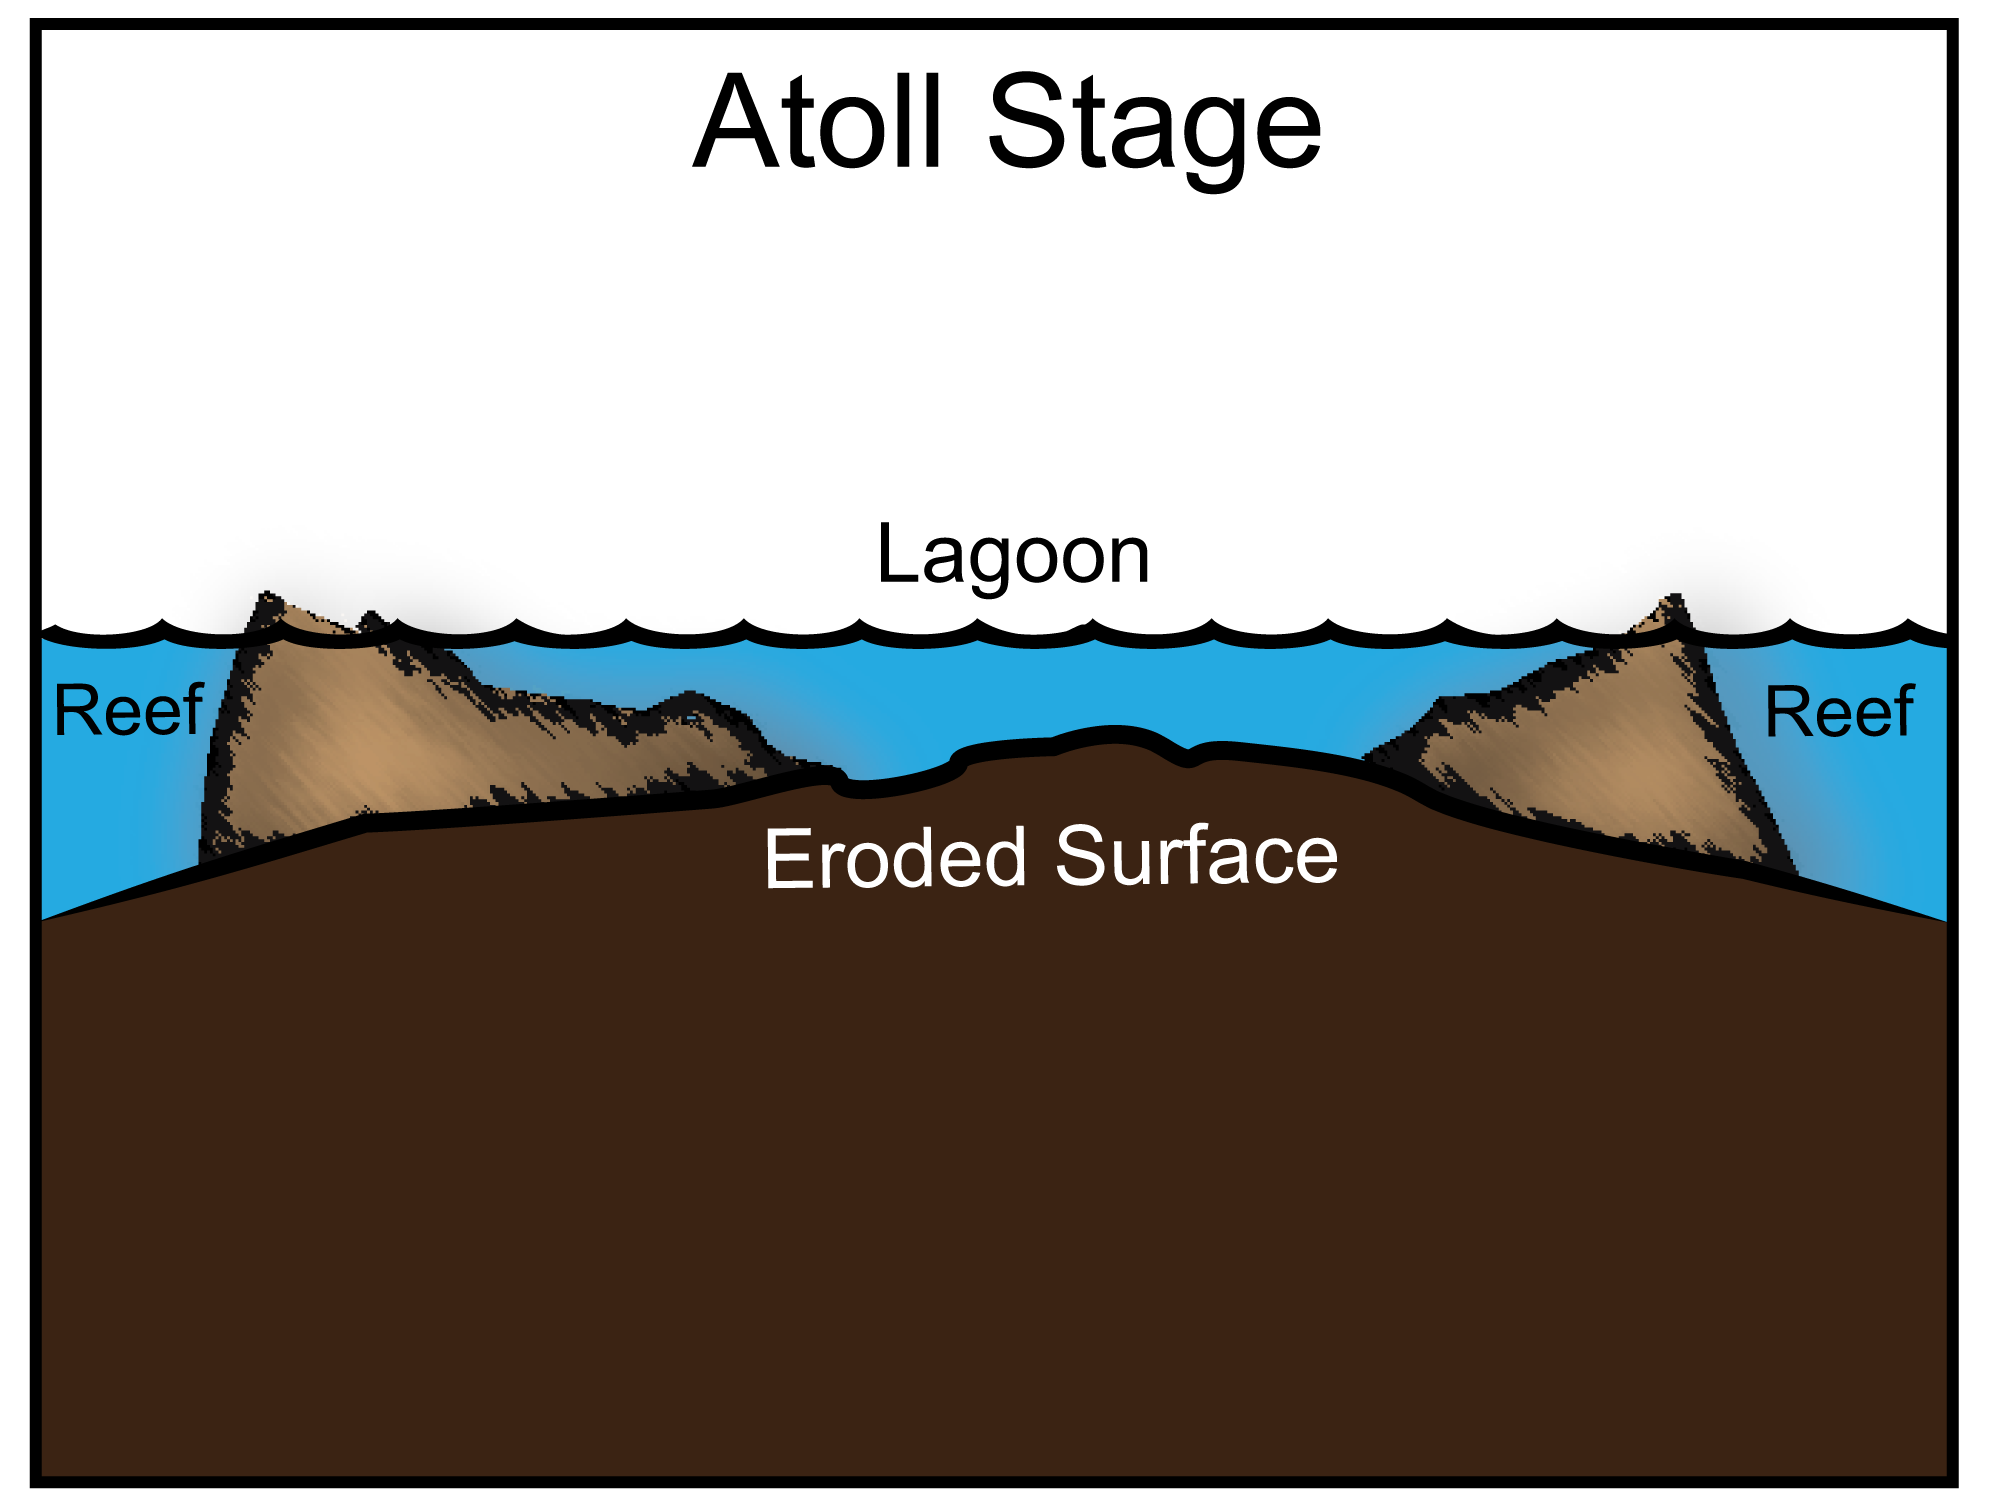 Diagram showing the Atoll Stage of a volcanic island. The diagram shows the eroded surface of the volcano completely submerged below water. Ridges of coral on the volcano still project about water. A lagoon occurs within the boundary formed by the coral ridge.